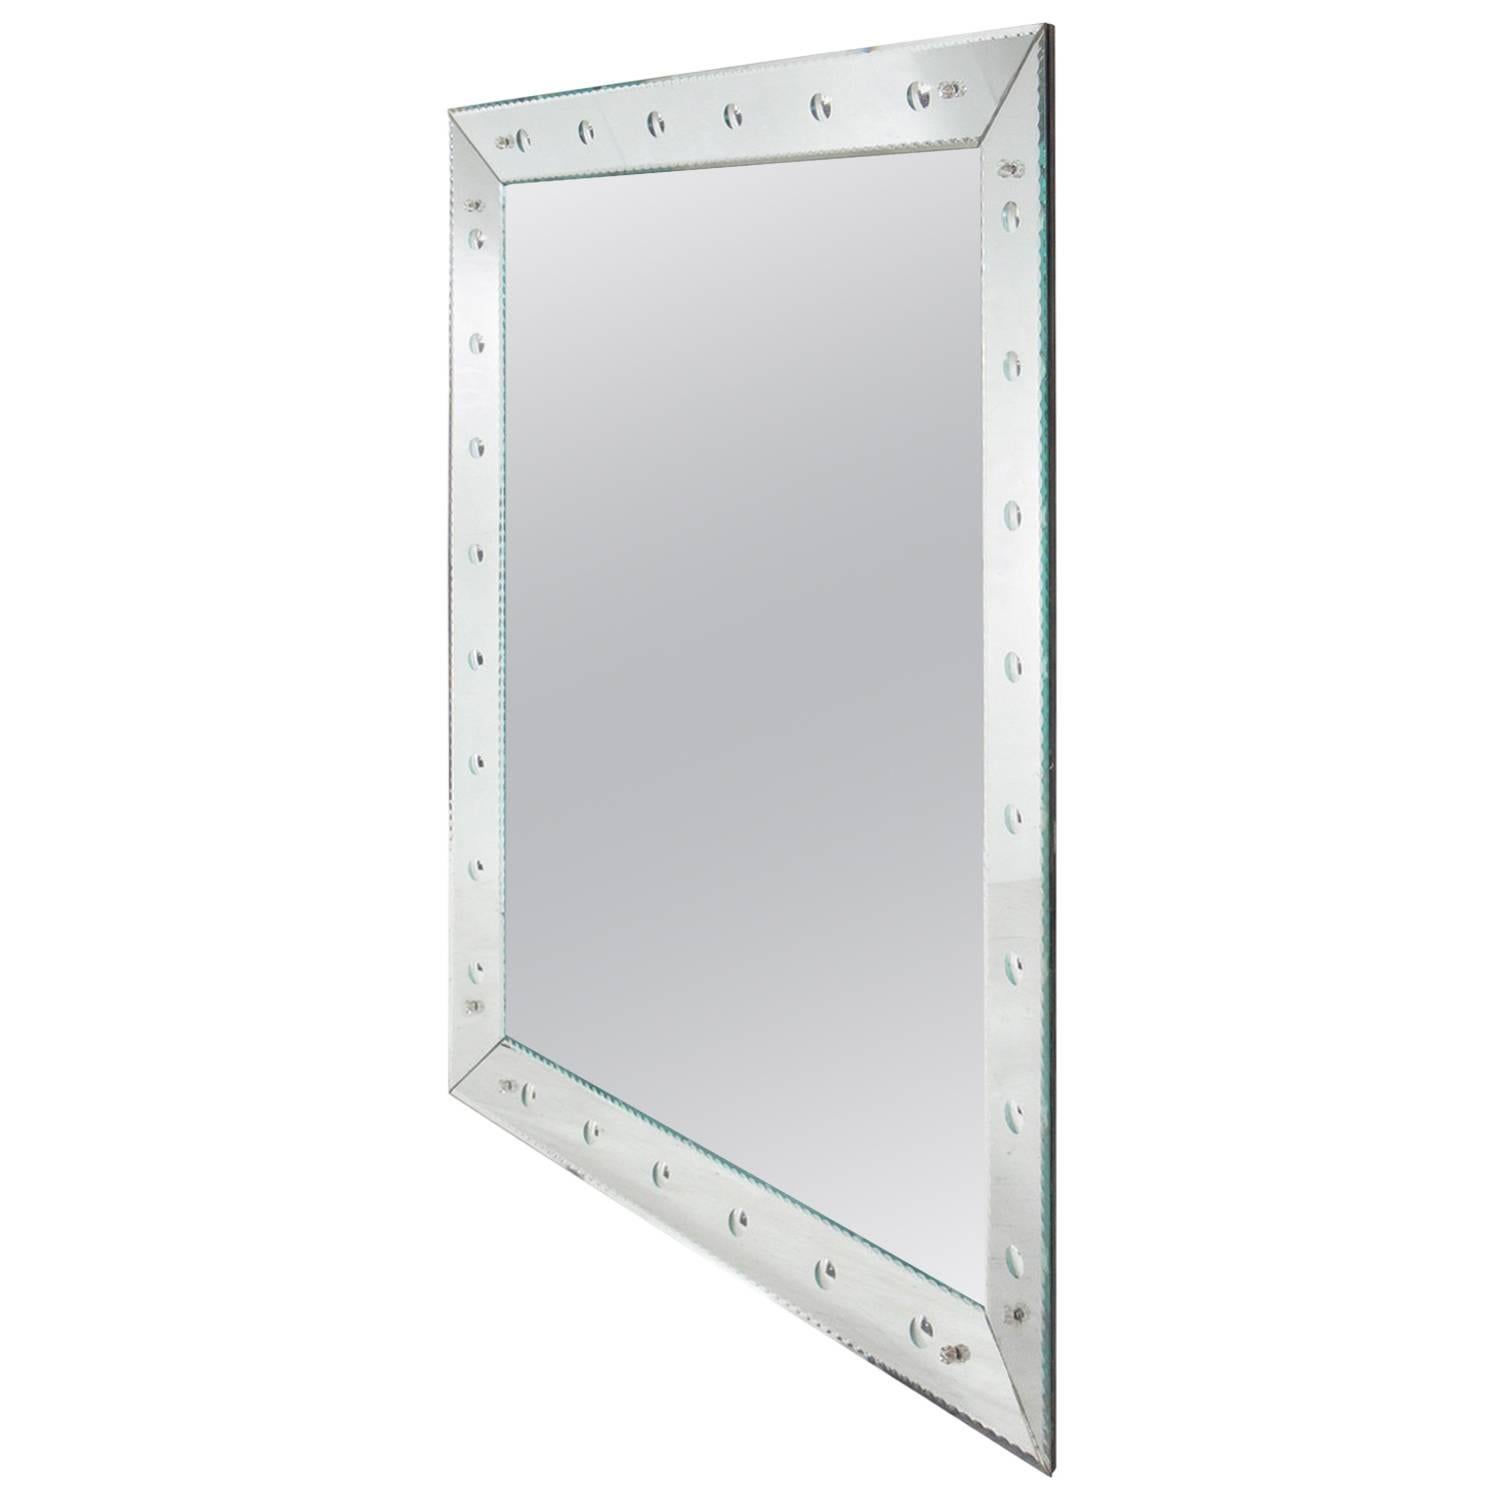 Large-scale 1950s Mirror, American, circa 1950s. It measures an impressive 60